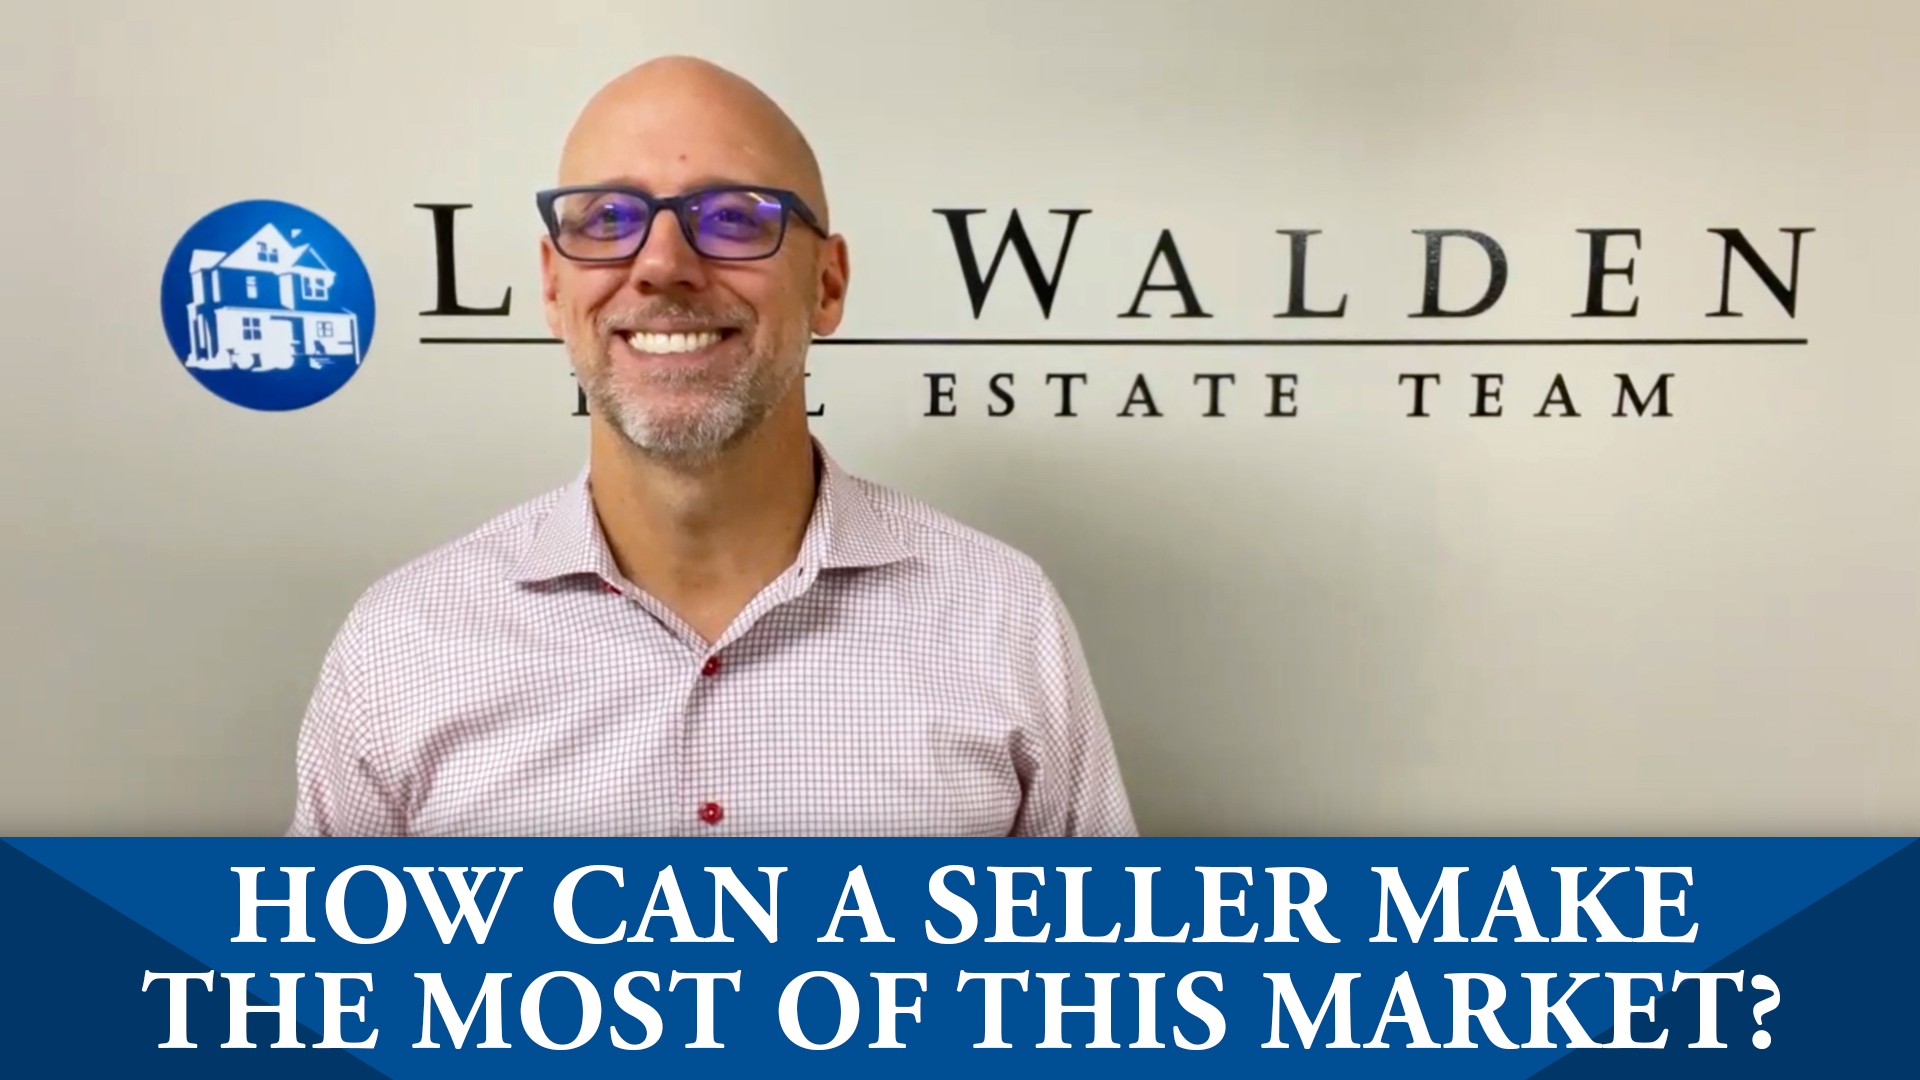 How to Make the Most of This Market When Selling